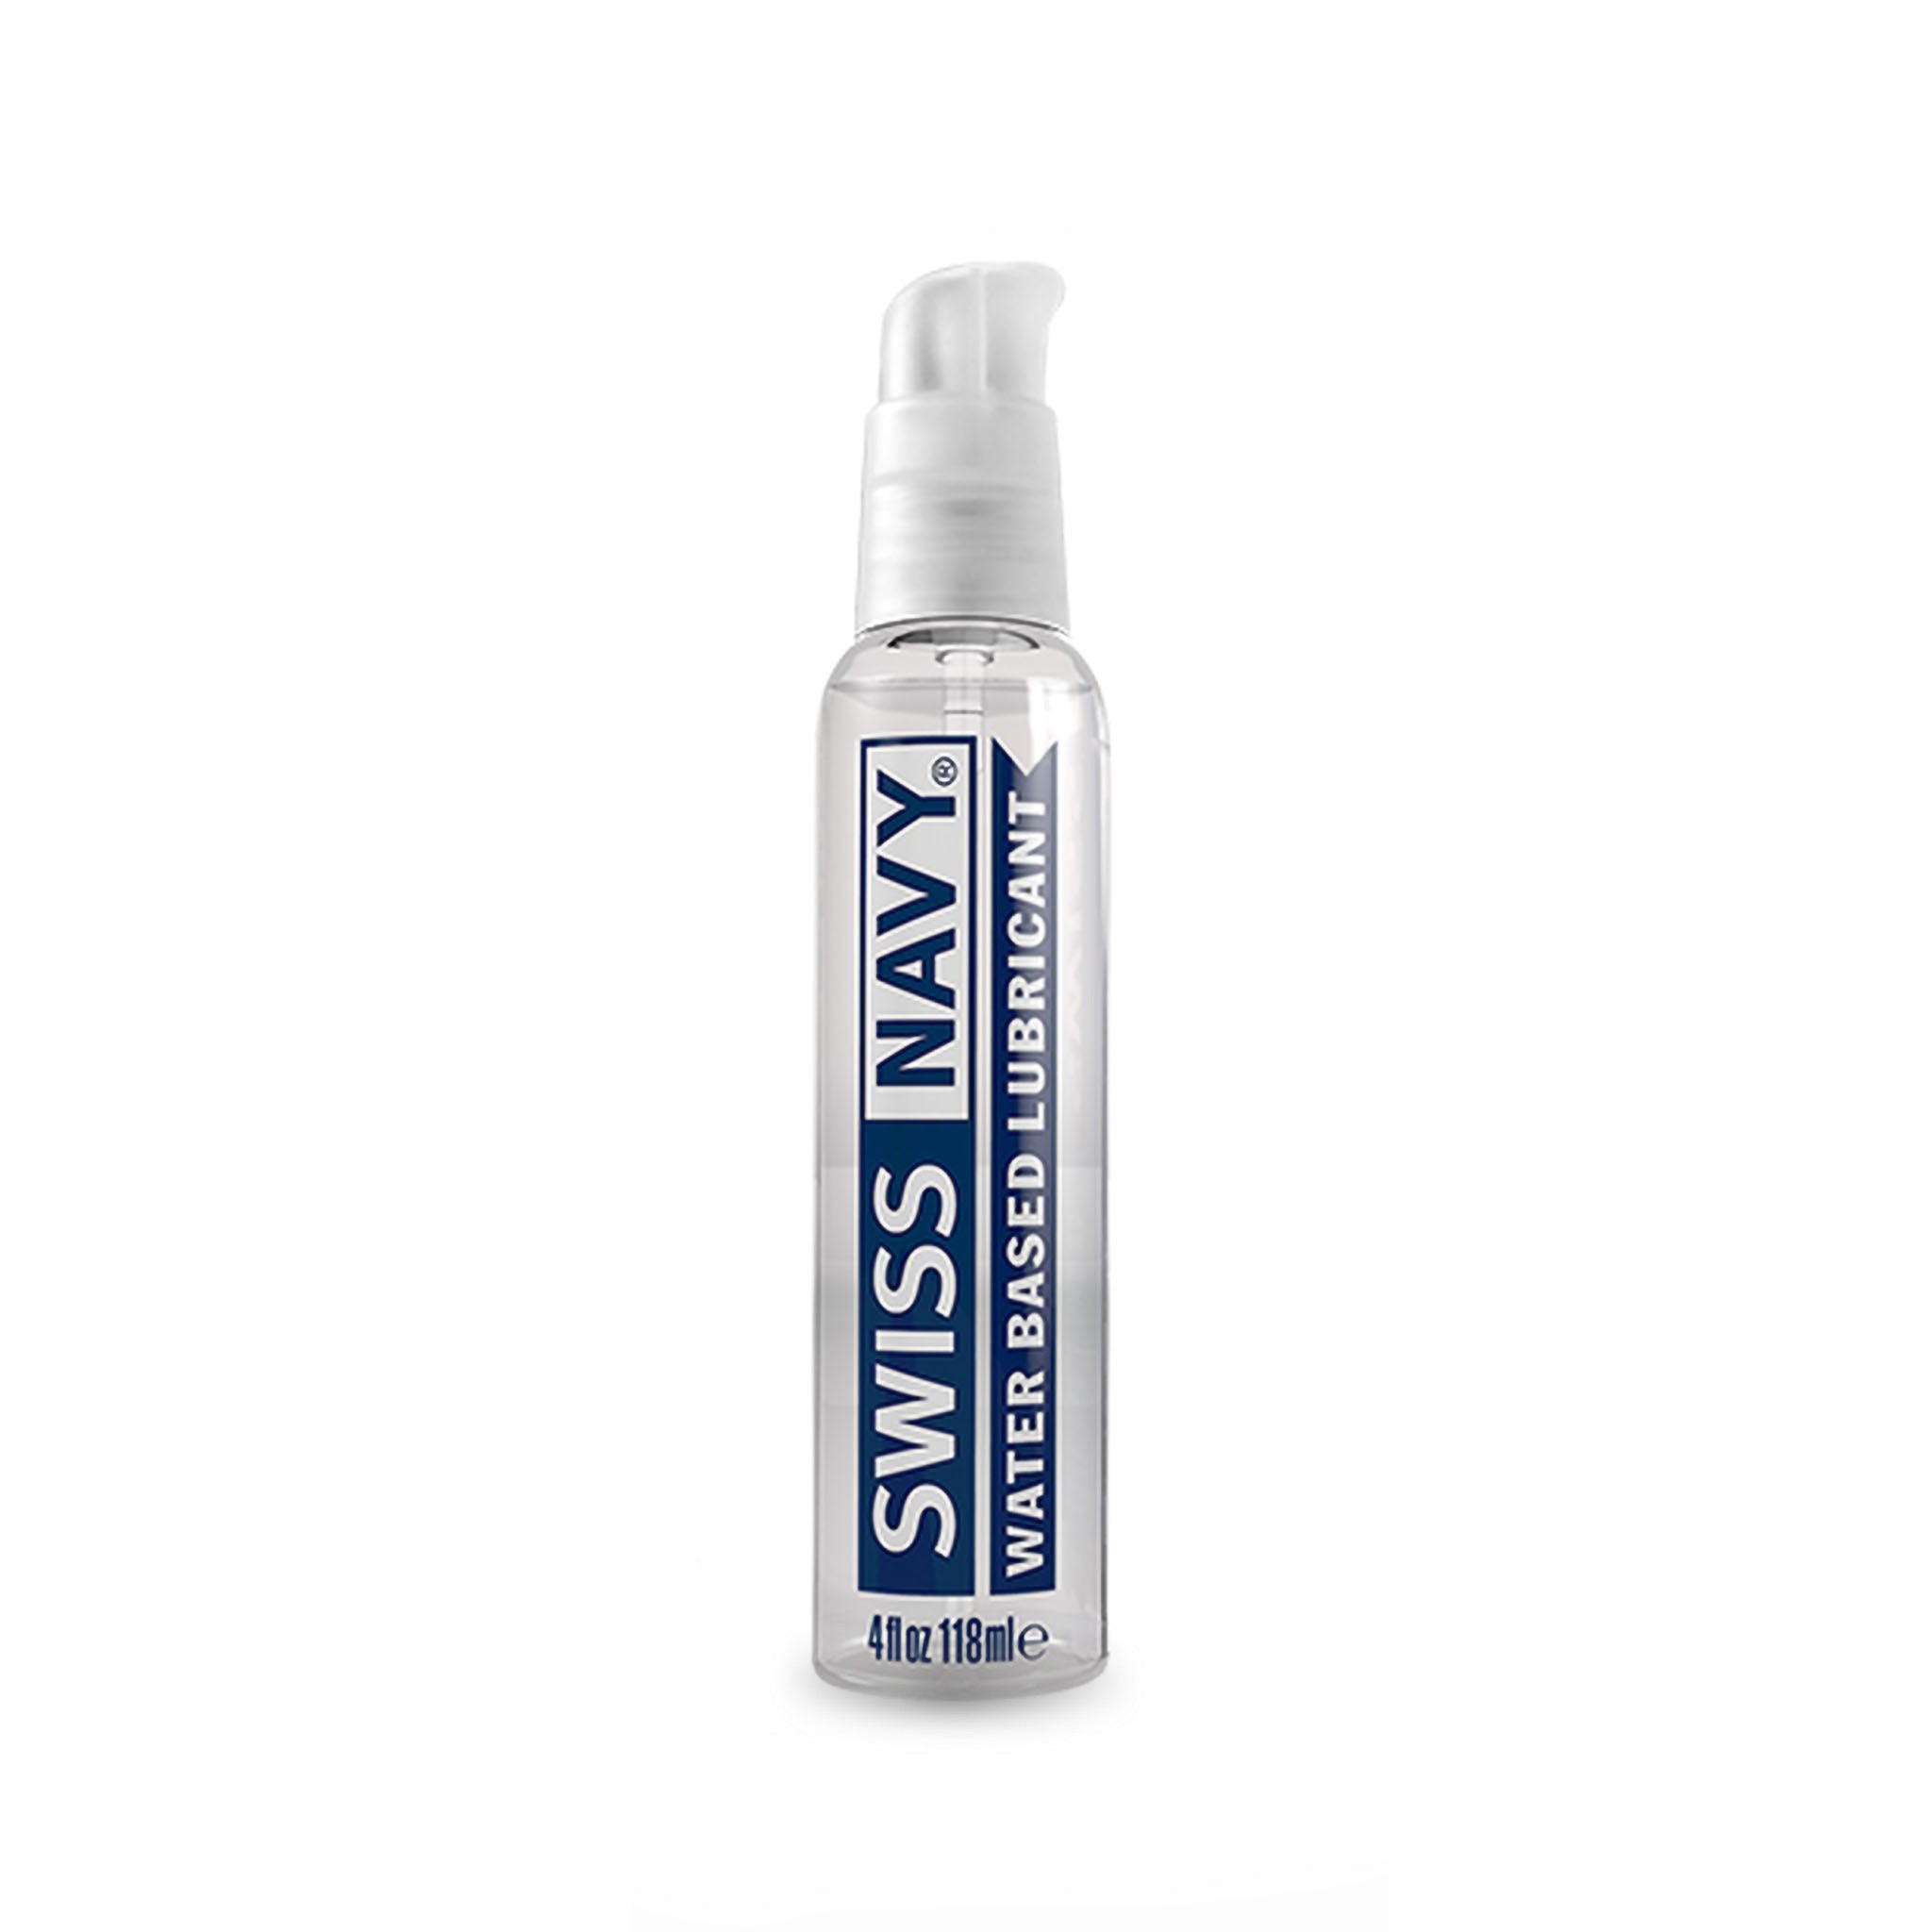 Swiss Navy Water-based Lube Personal Lubricant 4oz/118ml